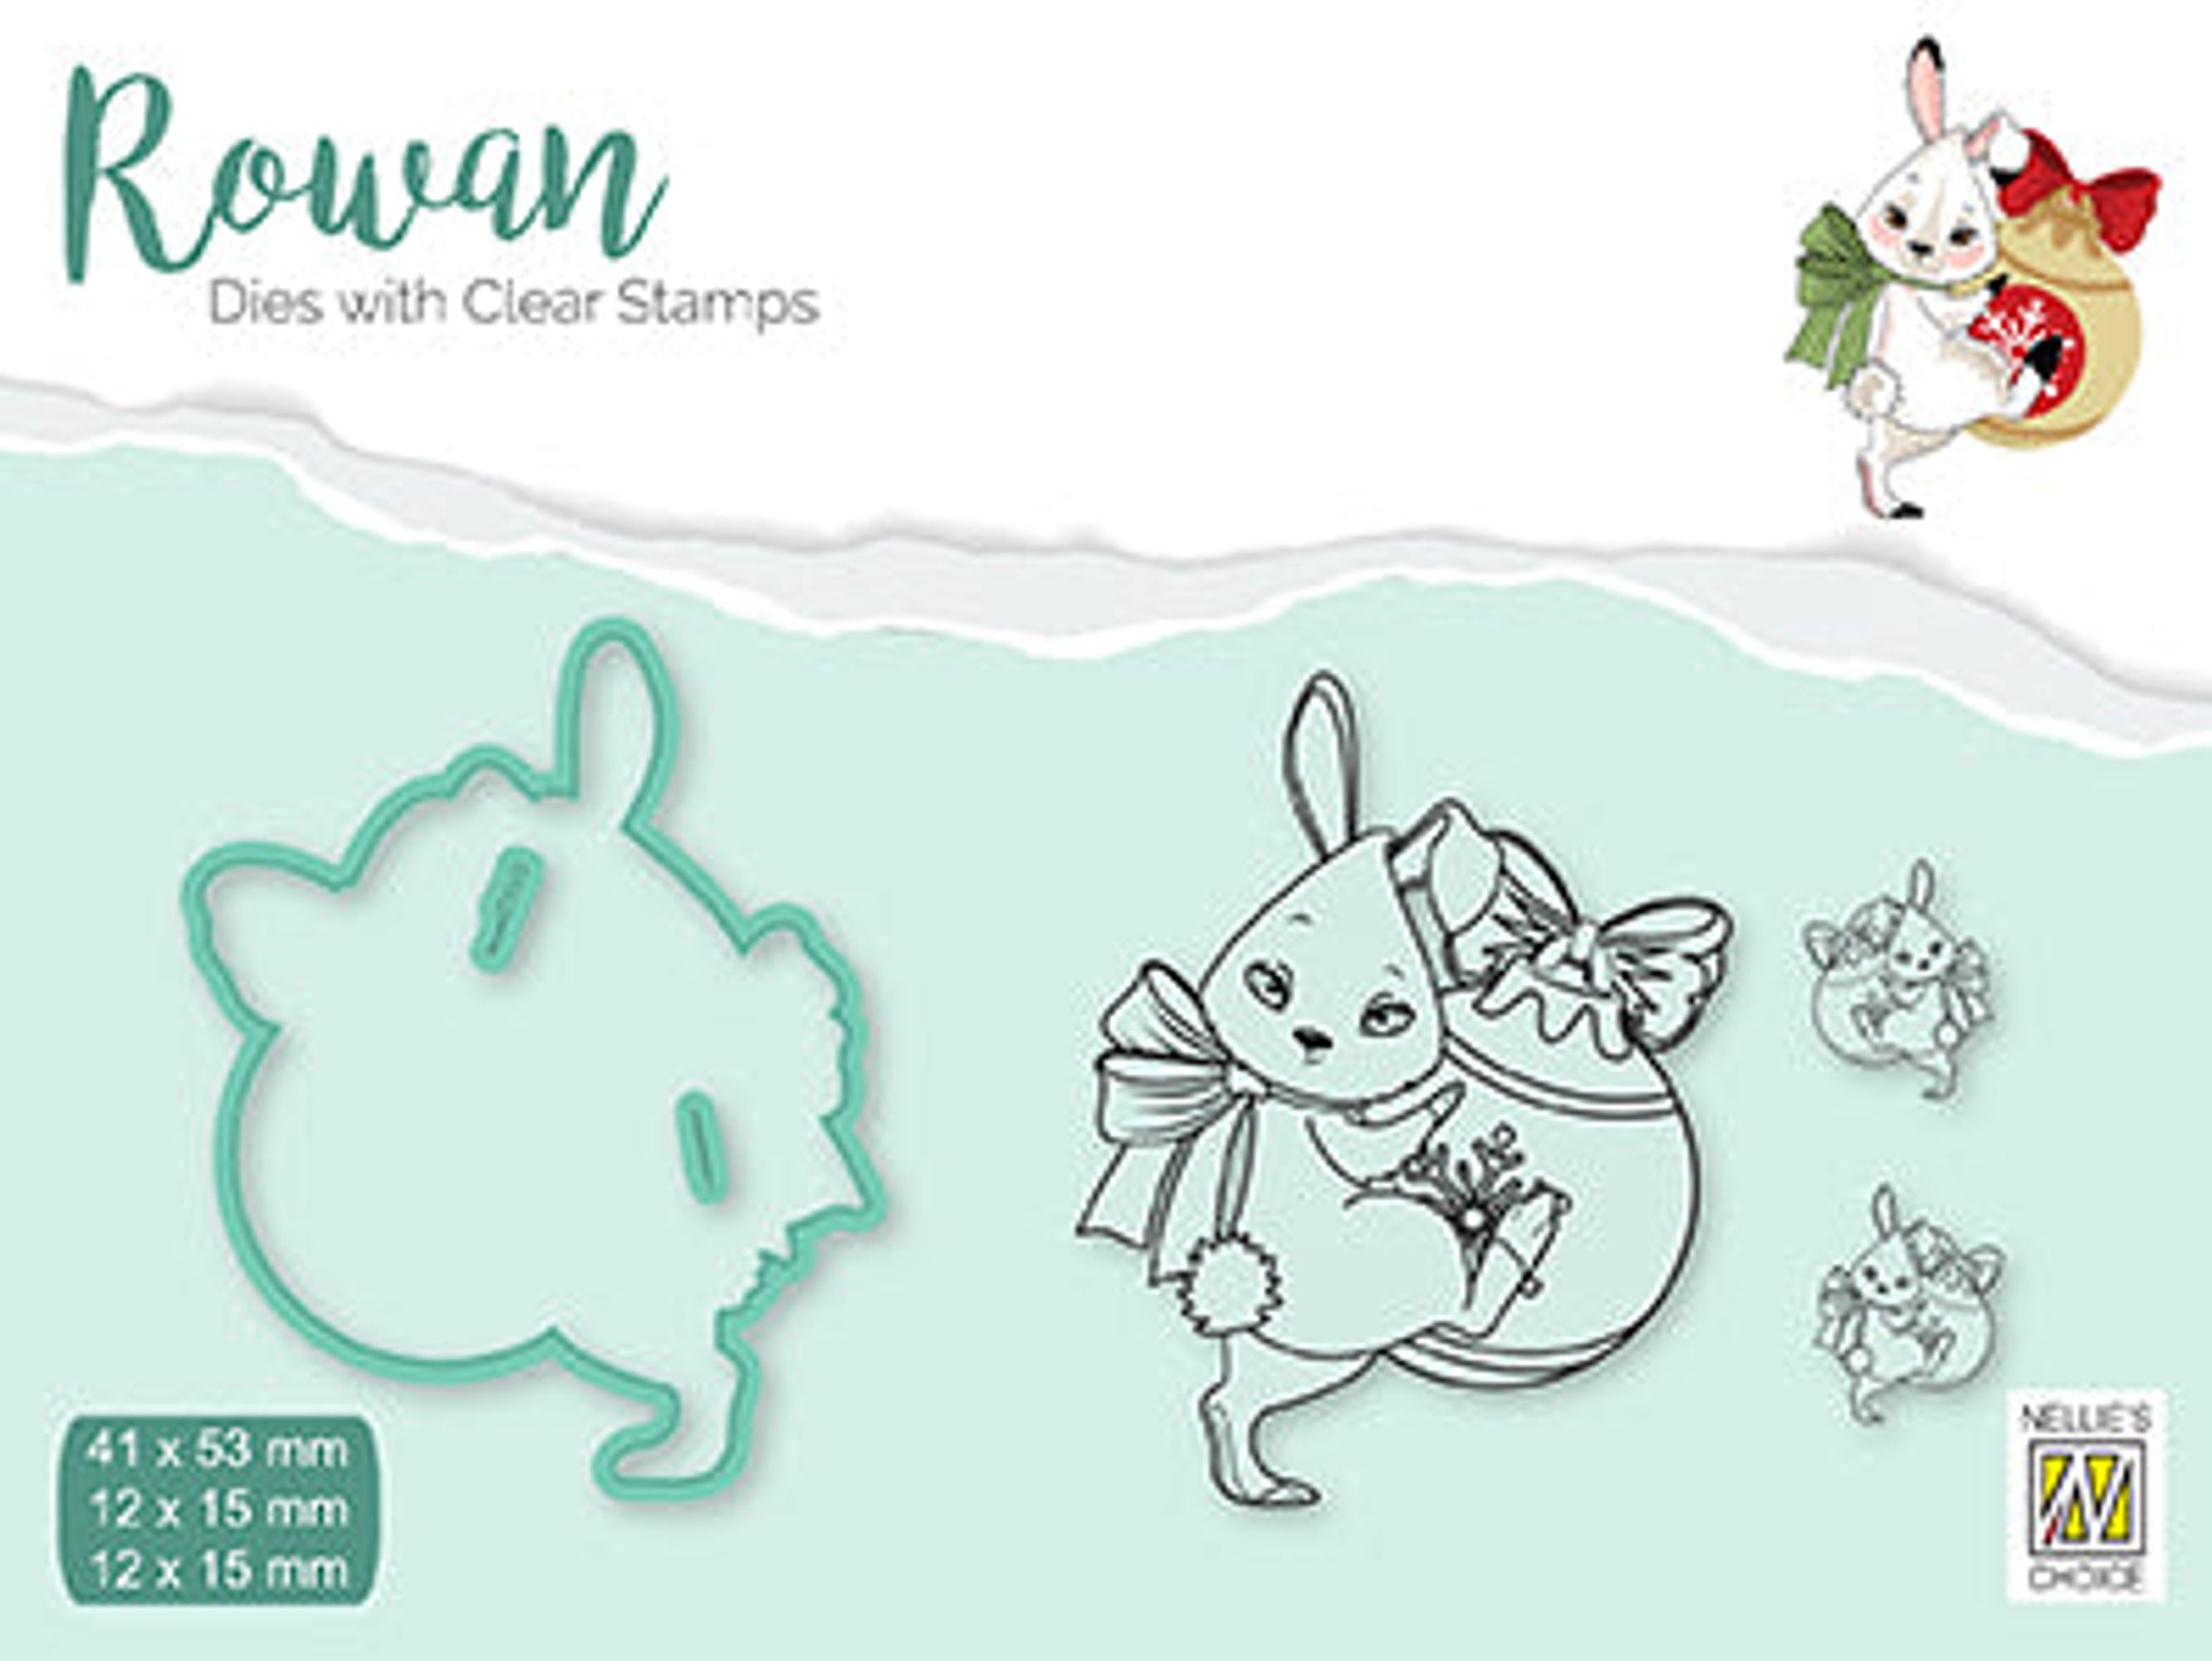 Rowan Dies with Clear Stamps Christmas Rabbit